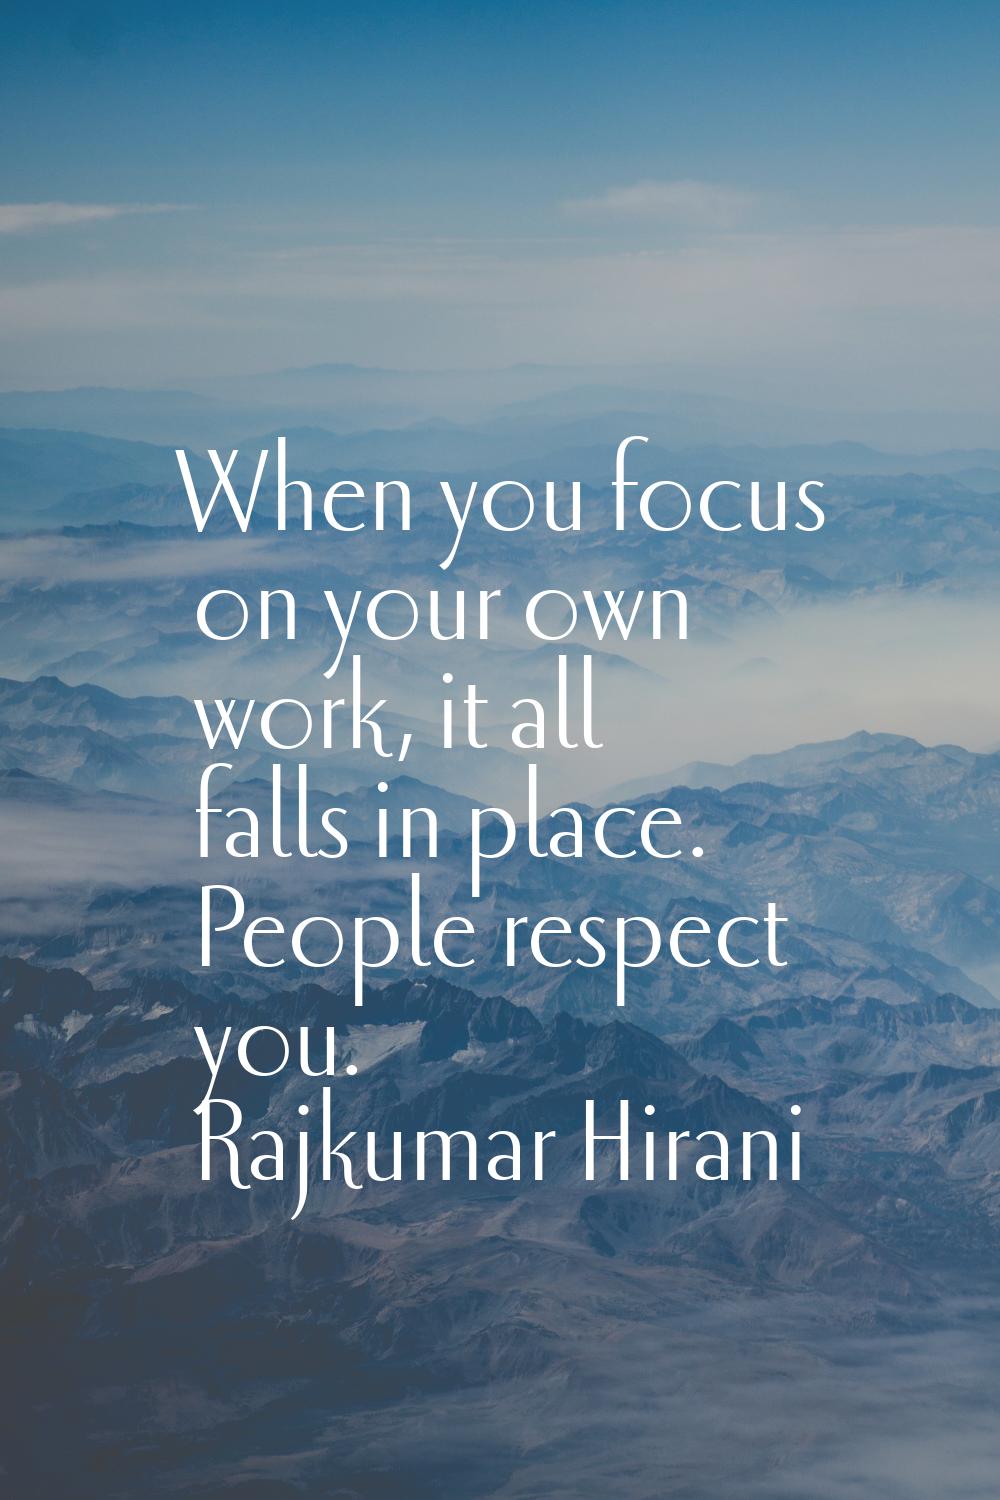 When you focus on your own work, it all falls in place. People respect you.